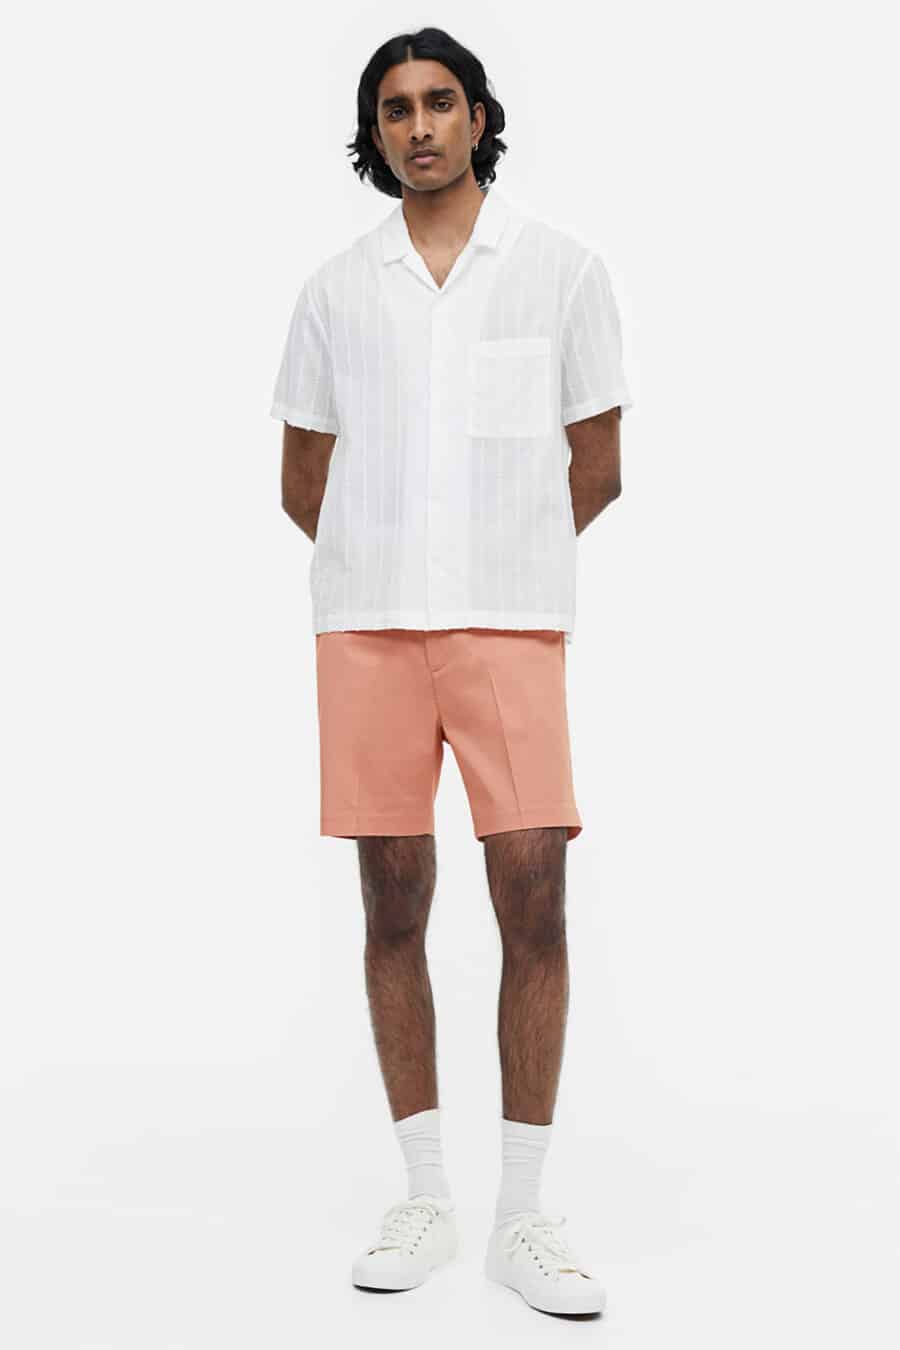 Men's pink shorts, white Cuban collar shirt, white socks and white sneakers outfit